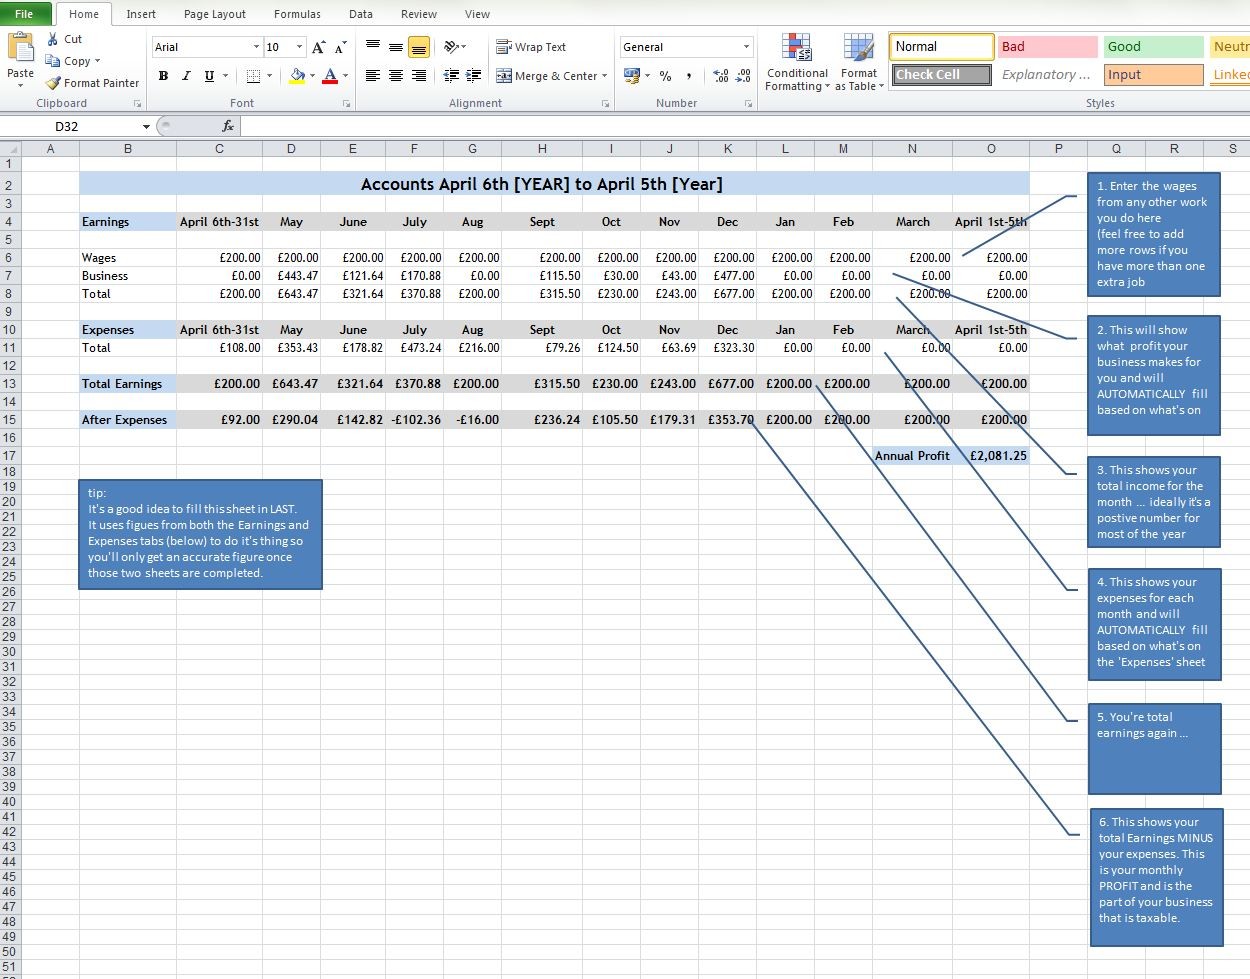 Tax Returns For Super Small Creative Businesses Part Two Becca Document Return Spreadsheet